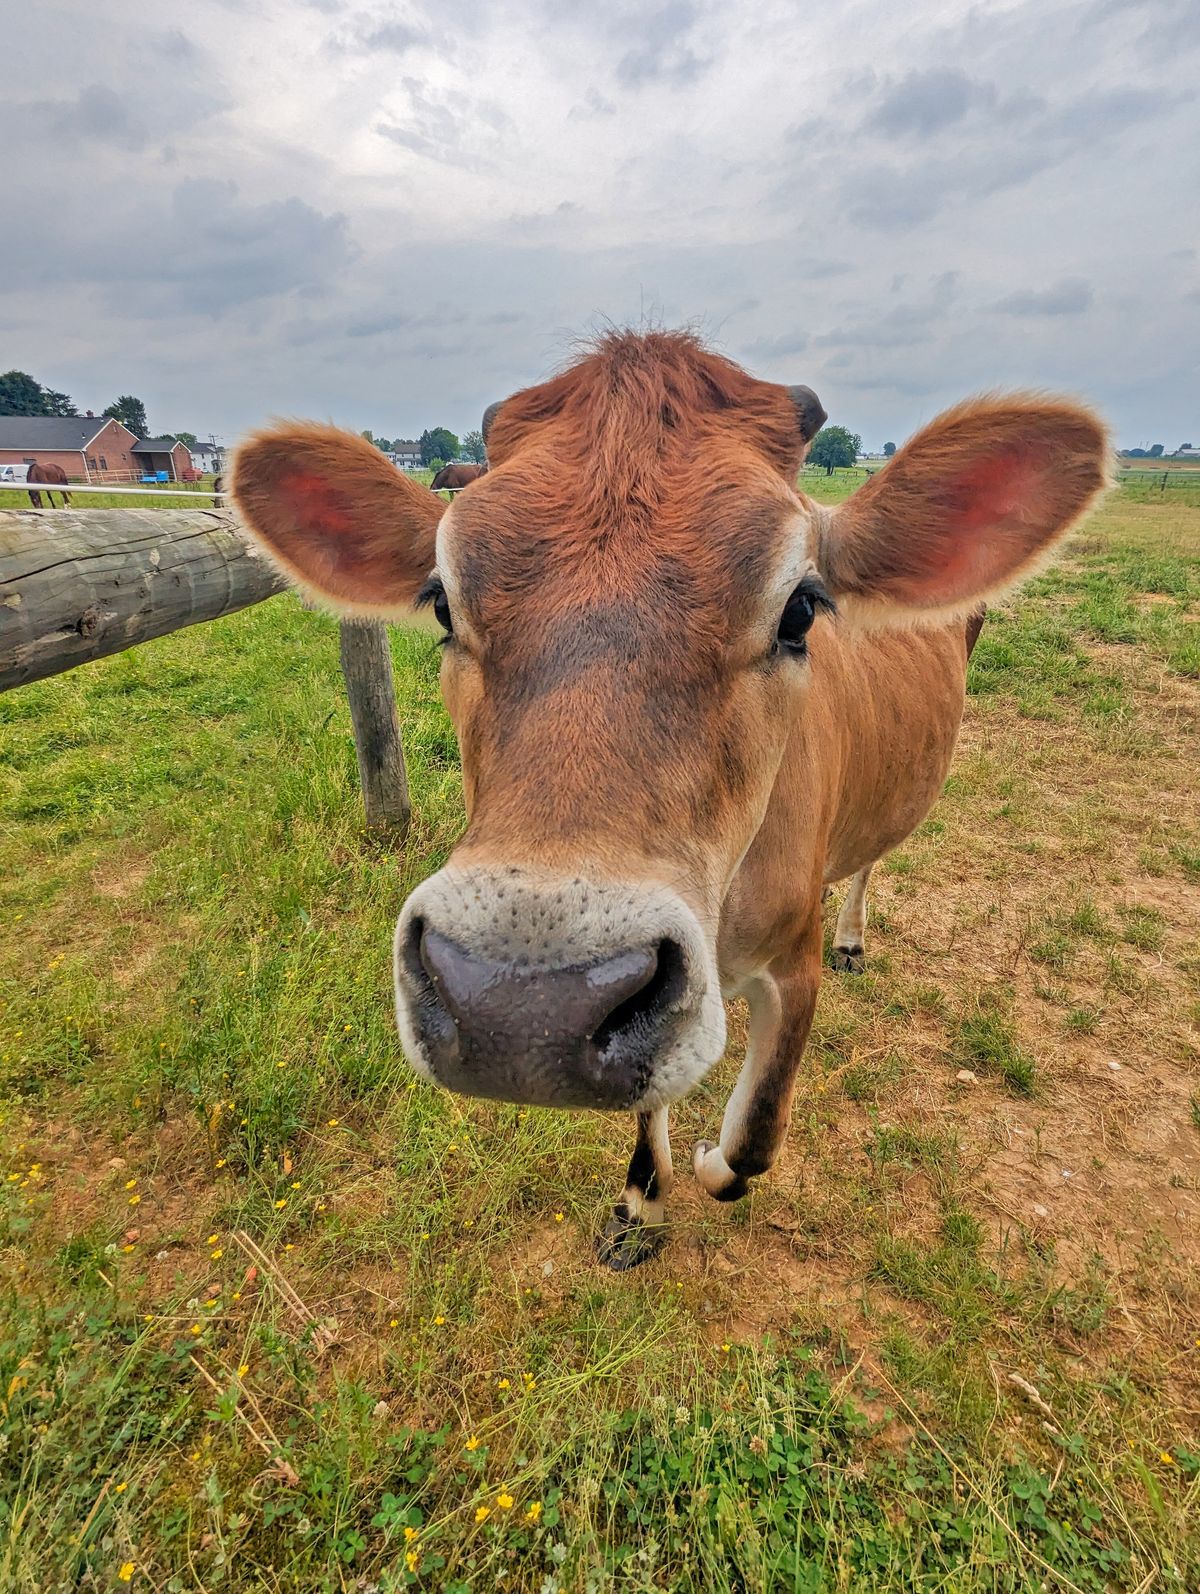 A close-up portrait of a baby brown Jersey cow. The cow's face fills most of the frame, with its large eyes, wet nose, and fuzzy ears clearly visible. The background shows a grassy field and some farm buildings in the distance under an overcast sky.